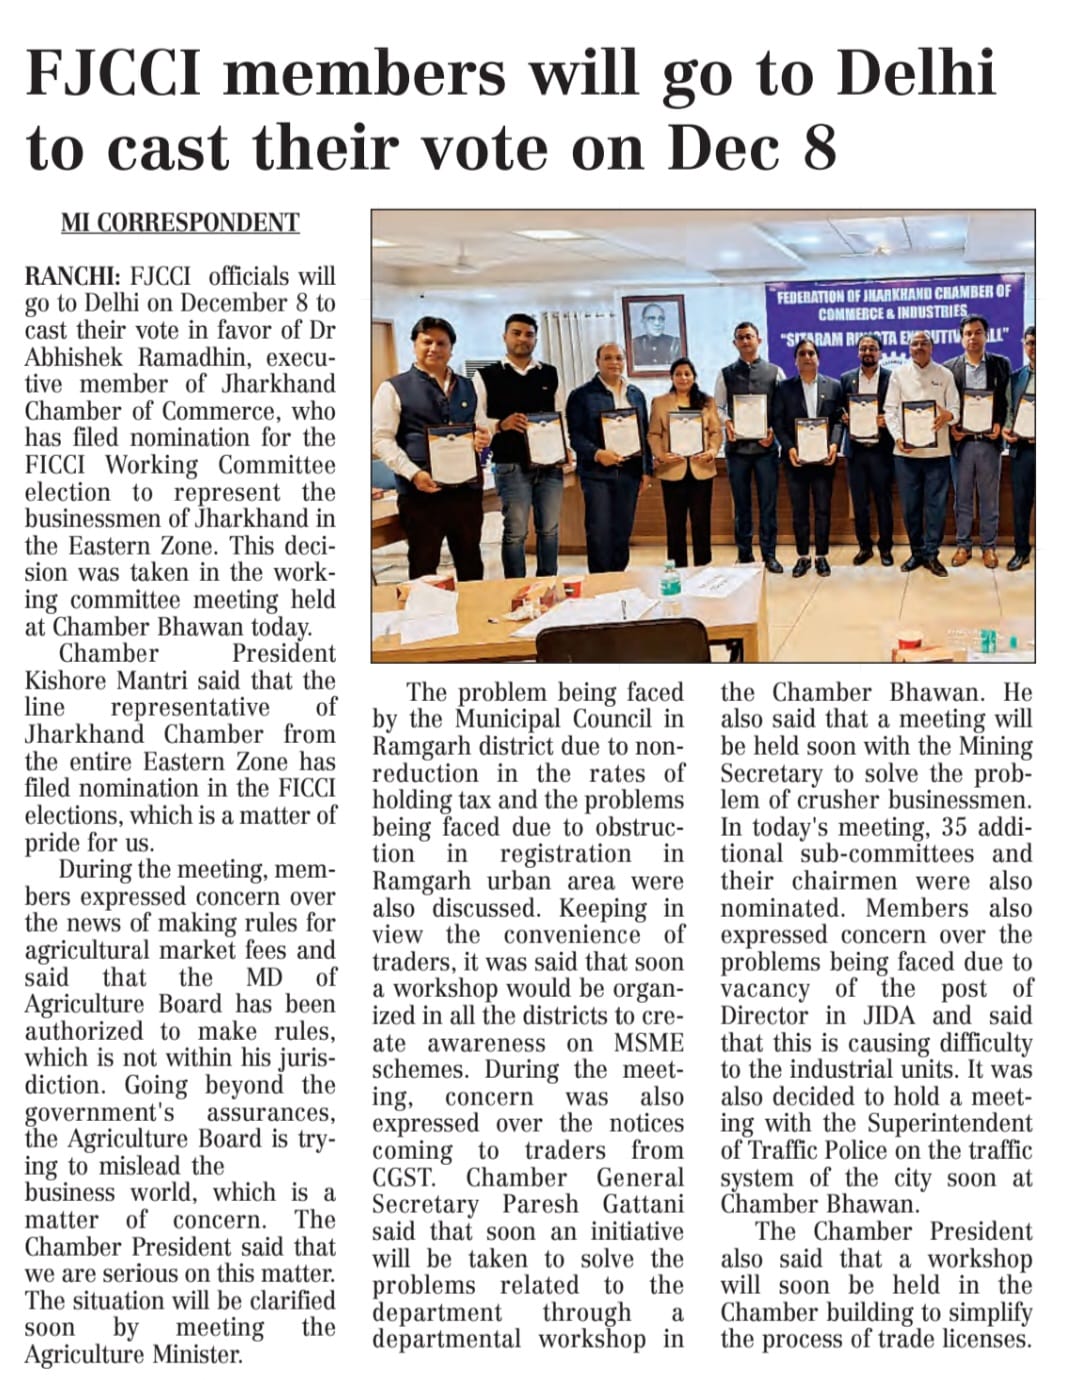 FJCCI members will go to Delhi to cast their vote on Dec 8